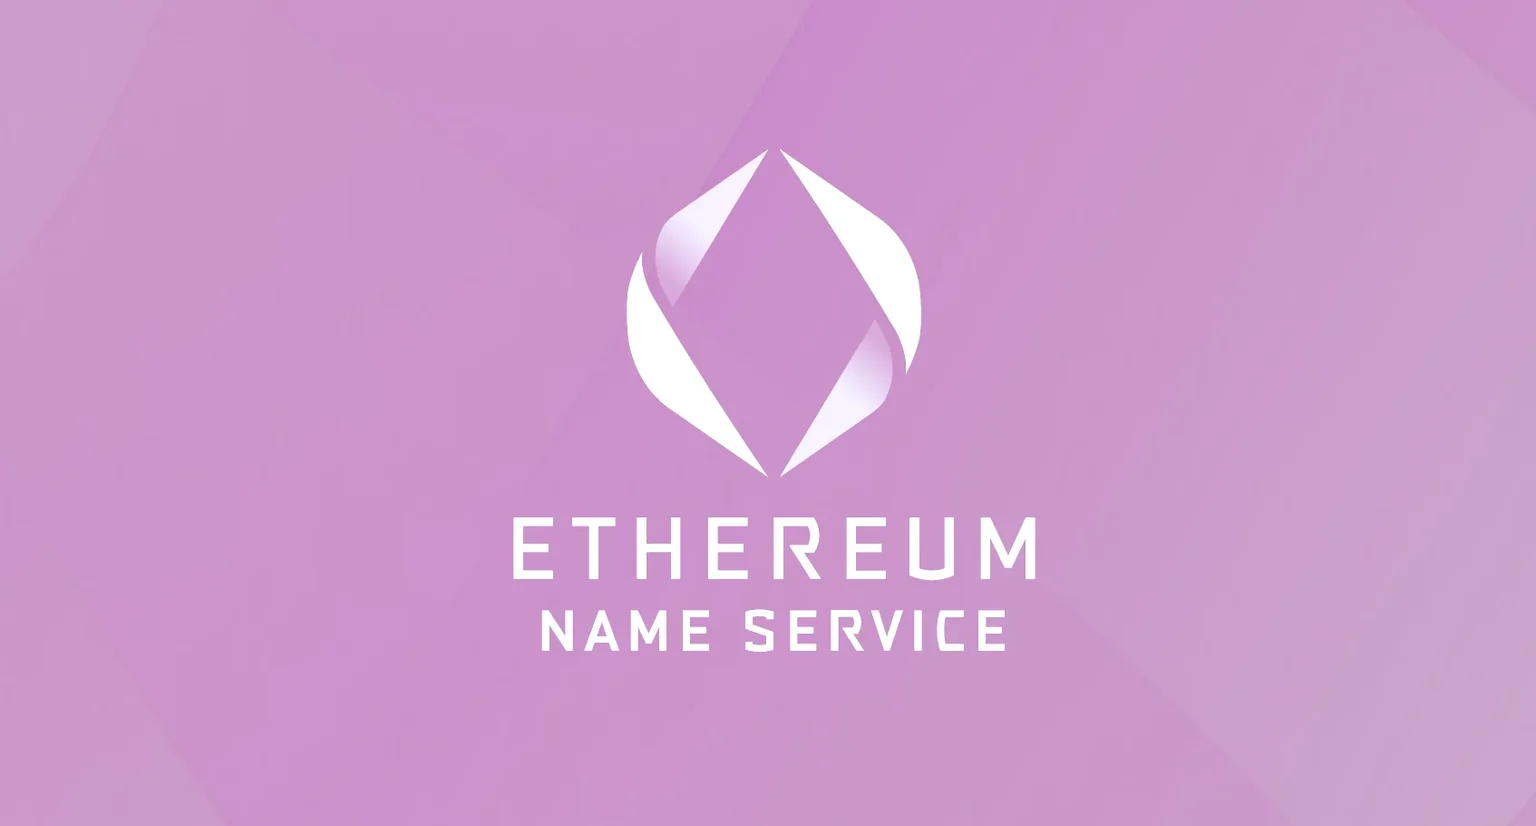 The Ethereum Name Service wants to make Ethereum easier to use. Image: Ethereum Name Service.